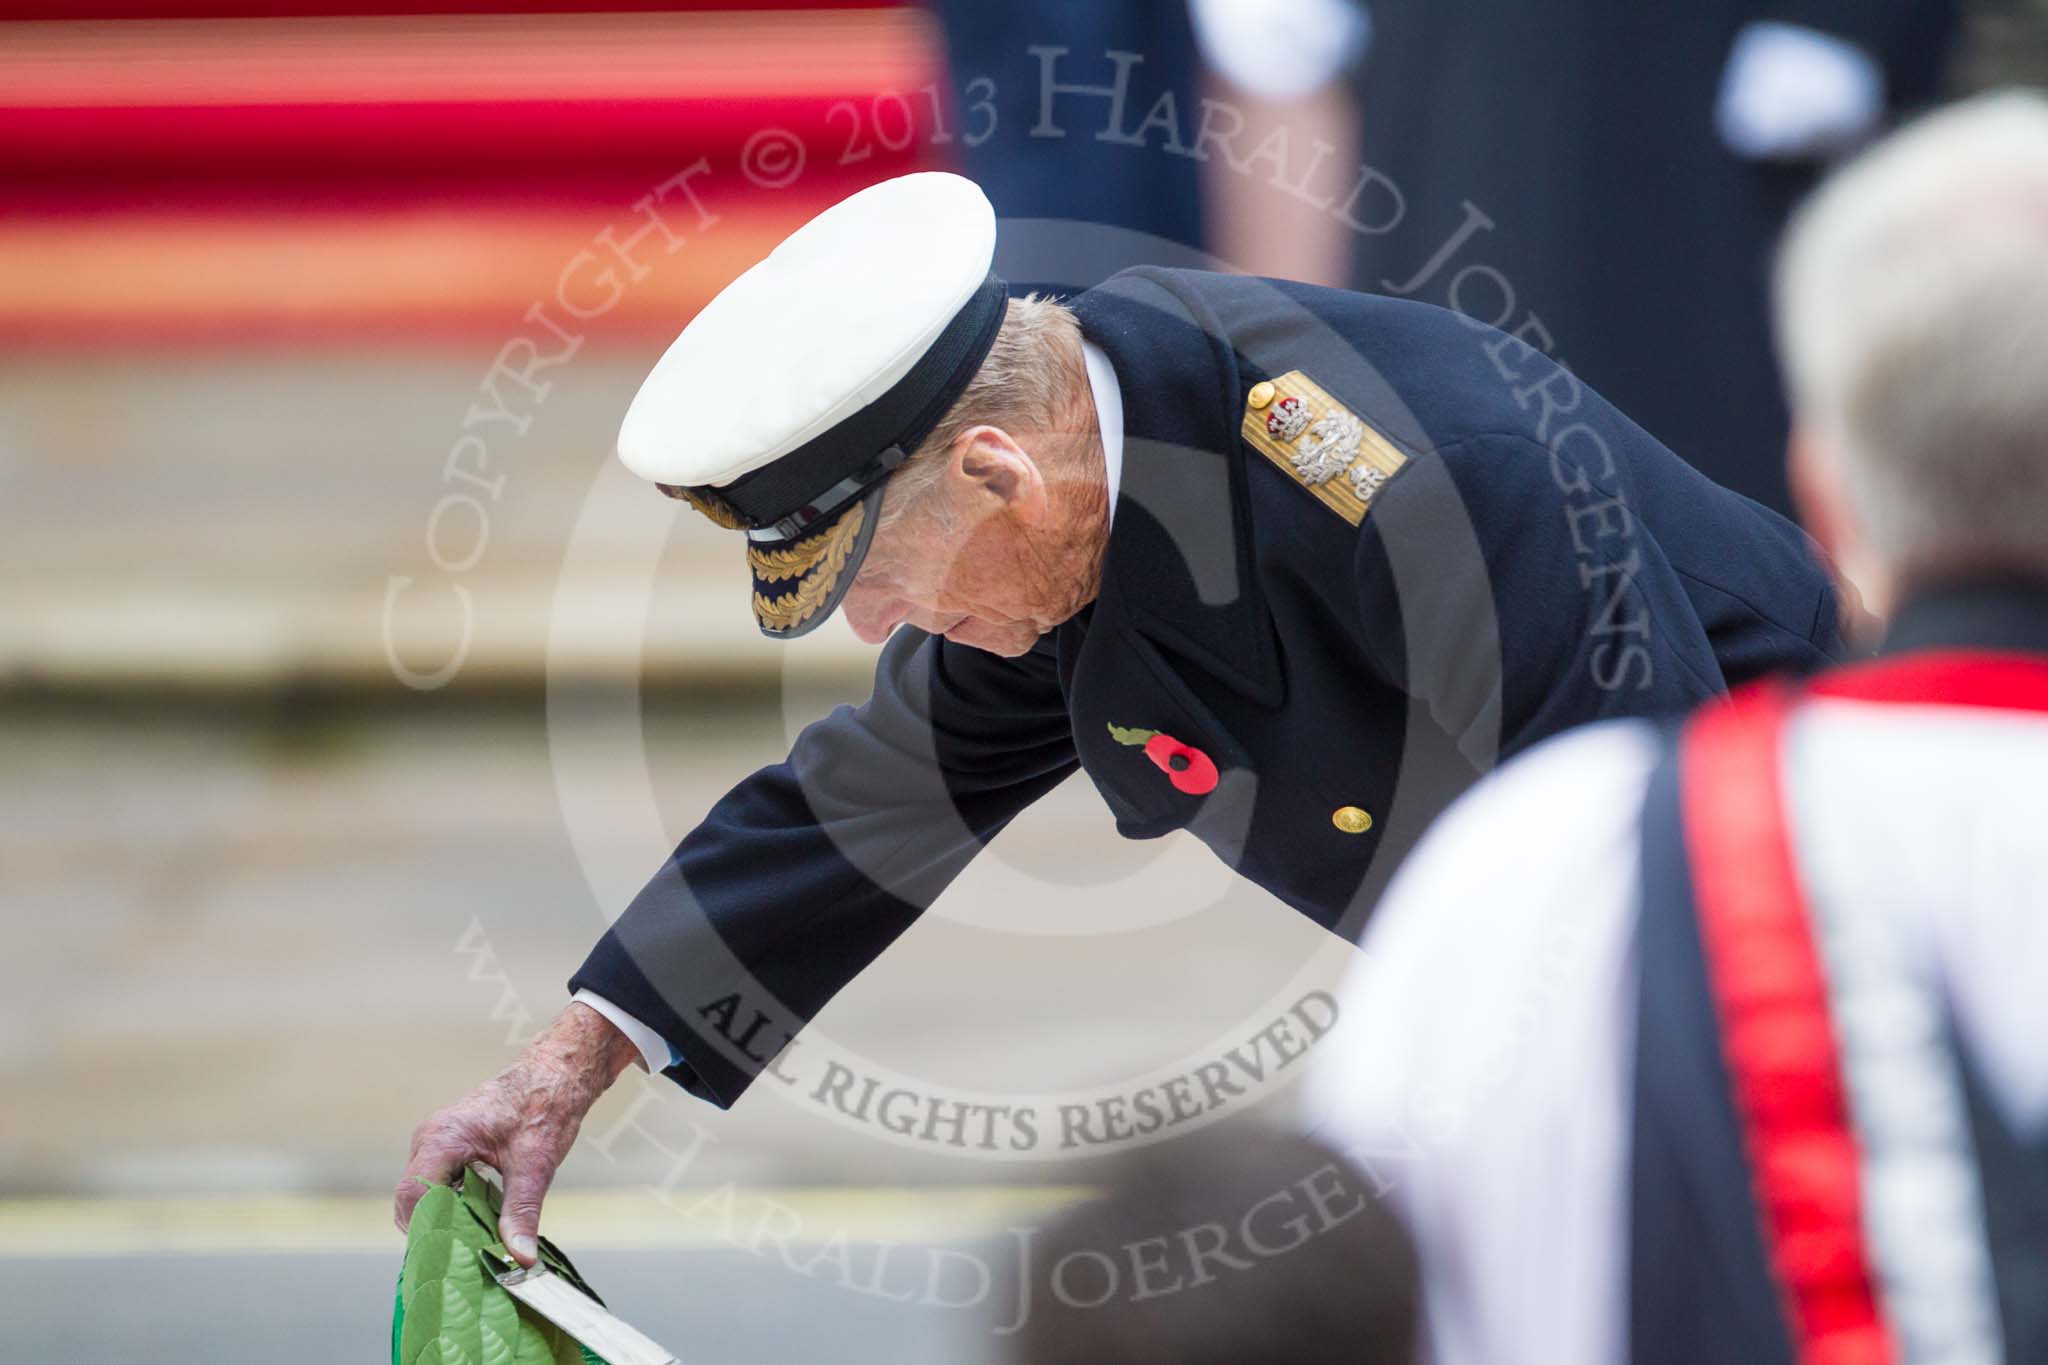 Remembrance Sunday at the Cenotaph 2015: HM The Duke of Edinburgh at the Cenotaph, laying his wreath. Image #187, 08 November 2015 11:04 Whitehall, London, UK